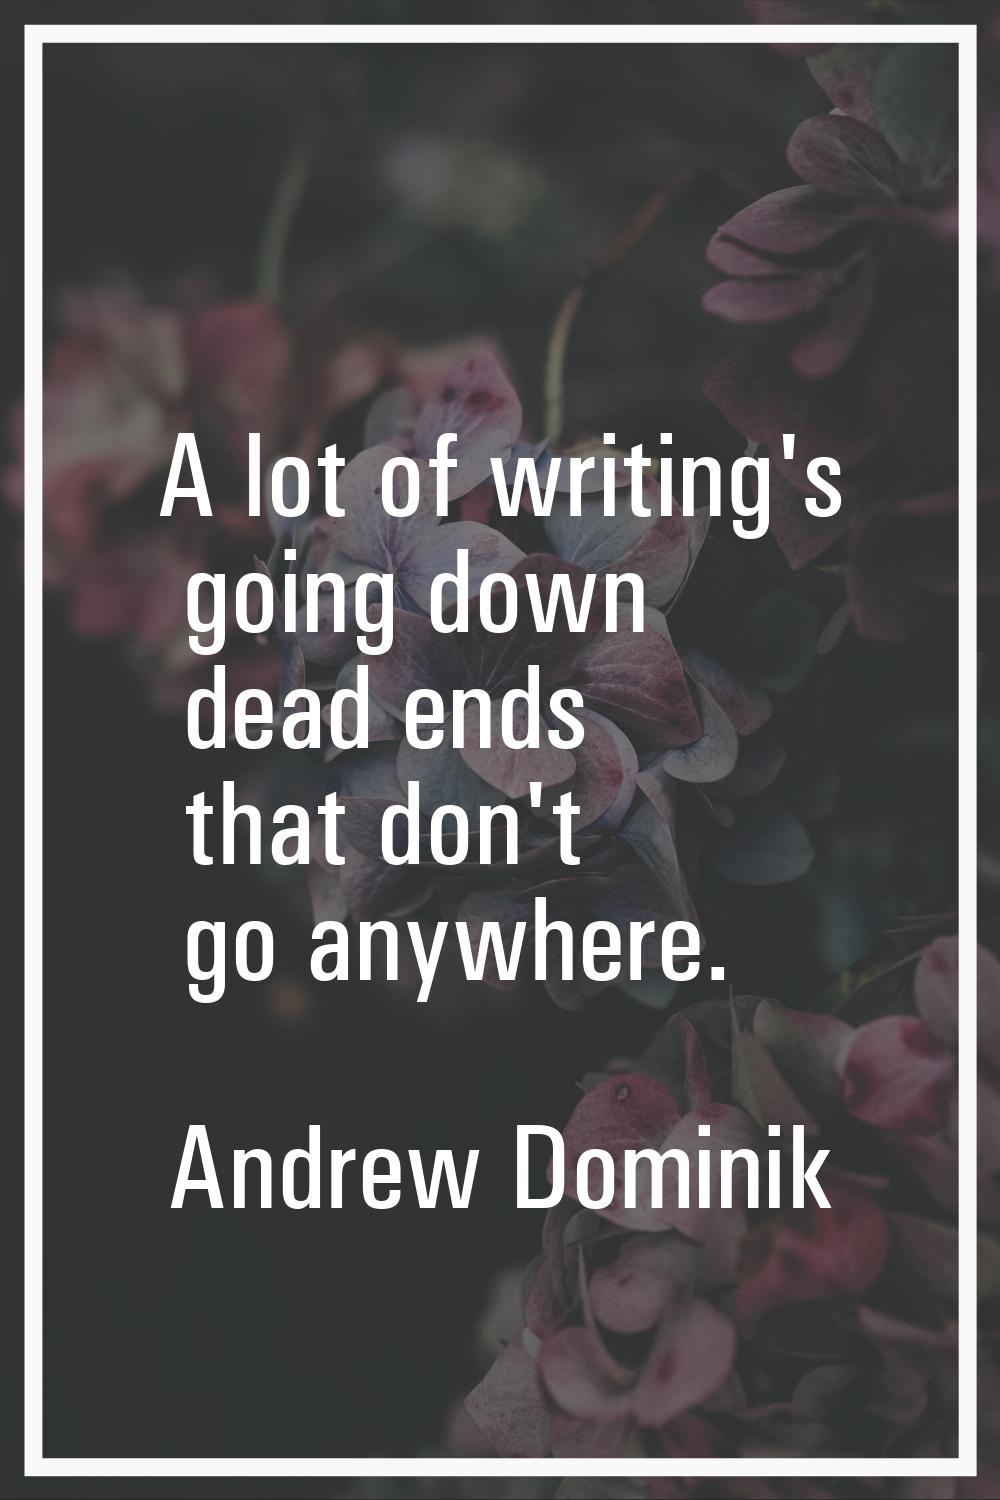 A lot of writing's going down dead ends that don't go anywhere.